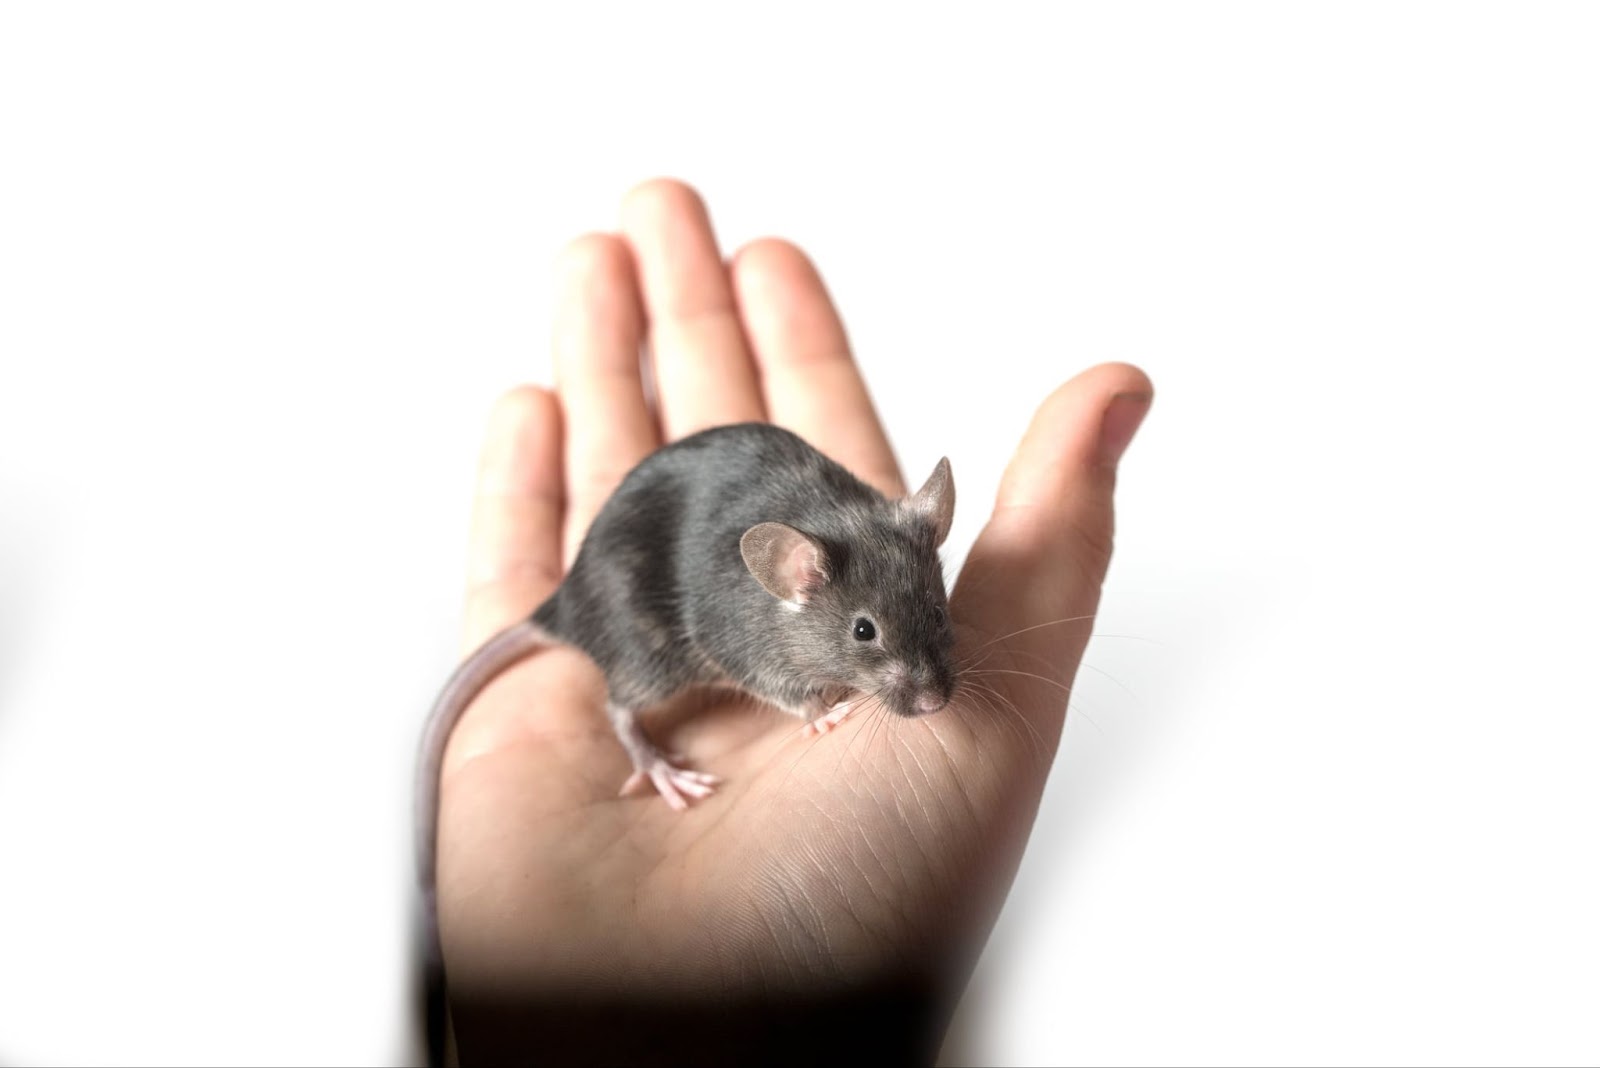 Small gray mouse sits in the palm of a hand